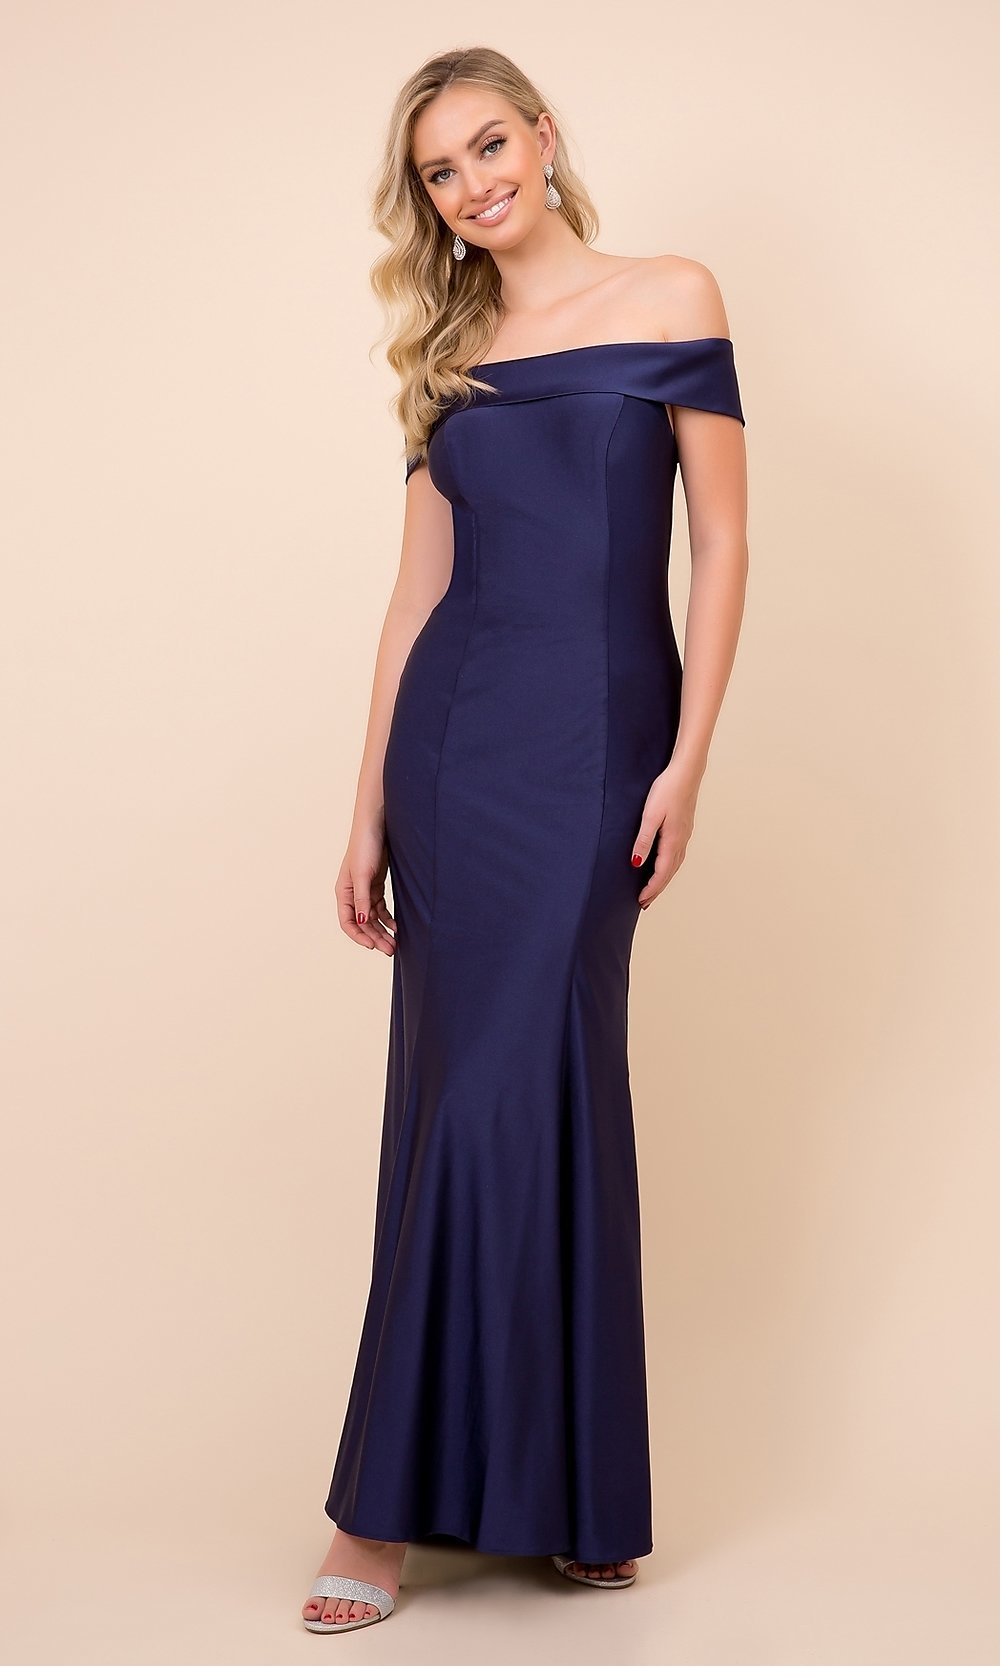 Navy Blue Off-the-Shoulder Classic Long Formal Evening Gown